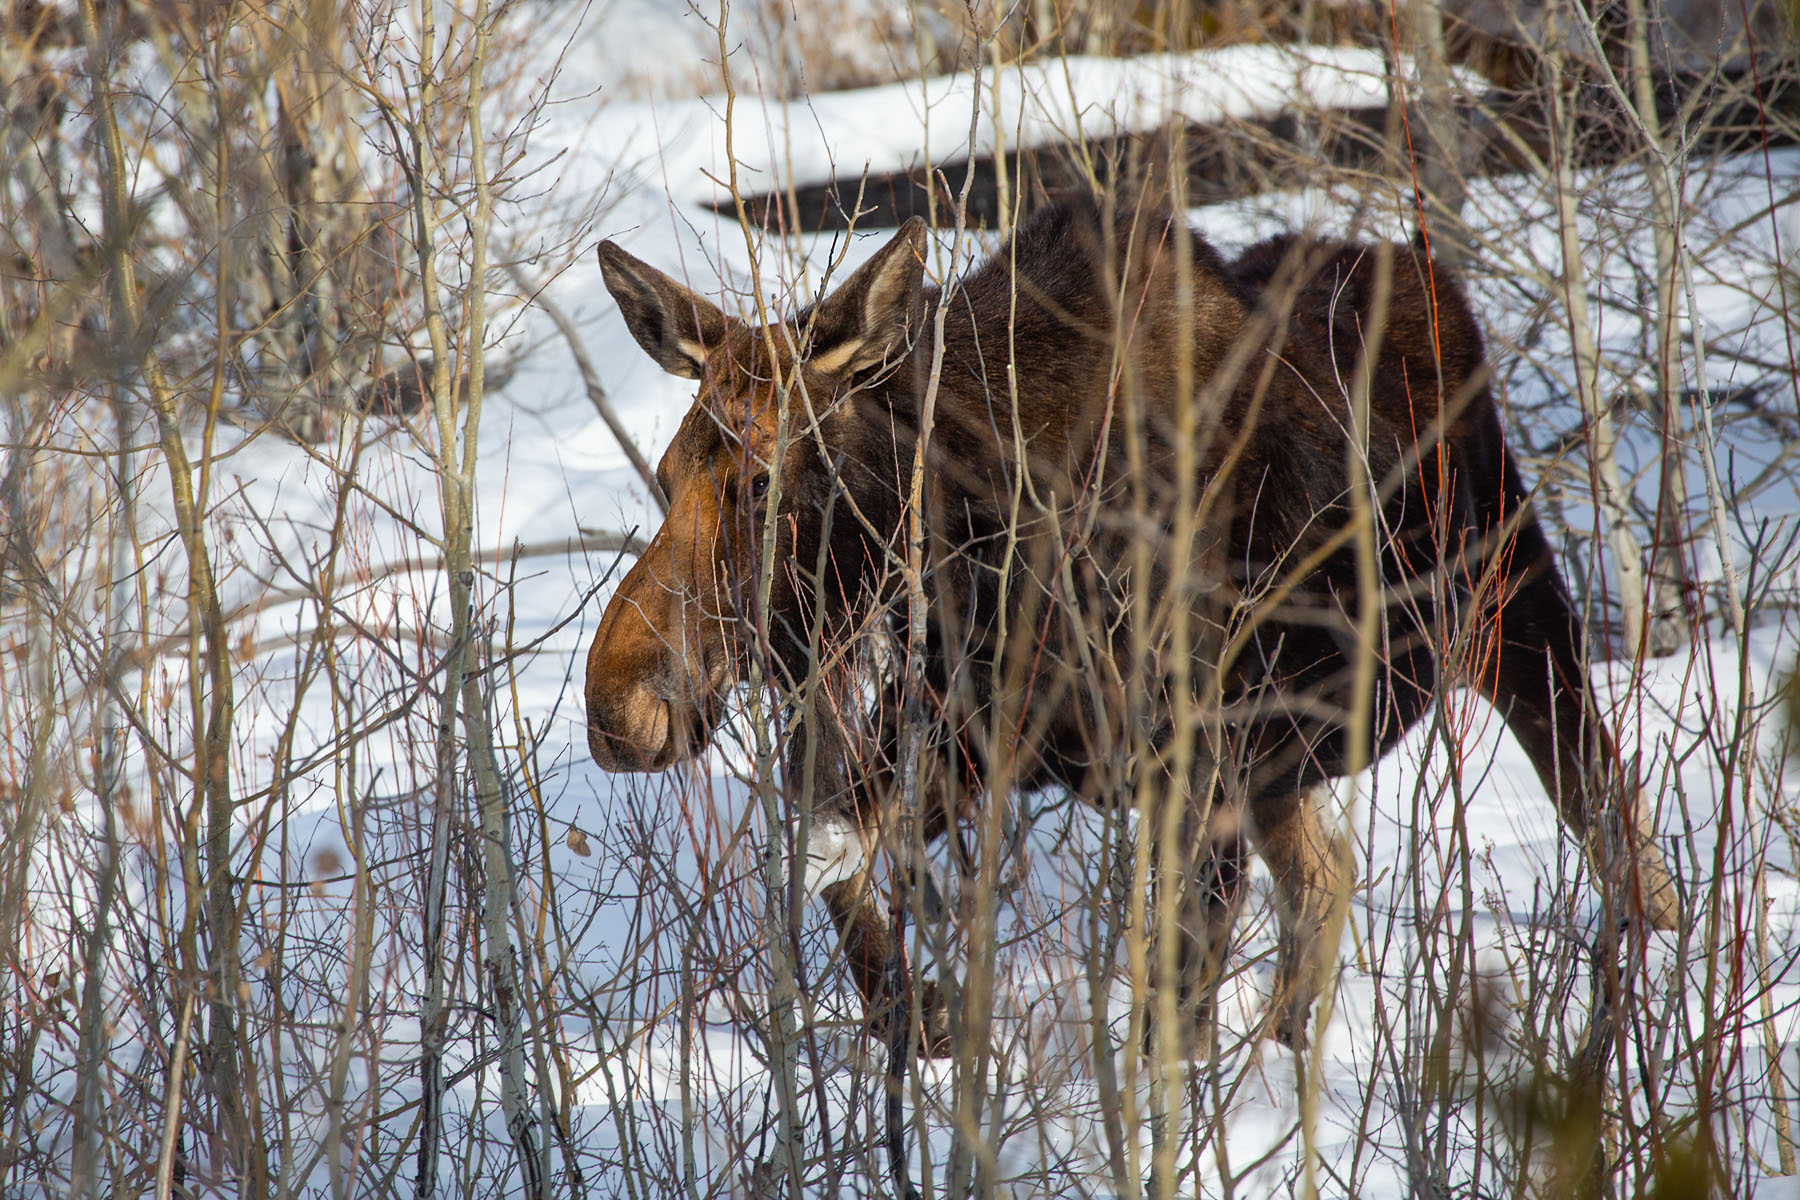 Moose, Yellowstone, February 2022.  Click for next photo.